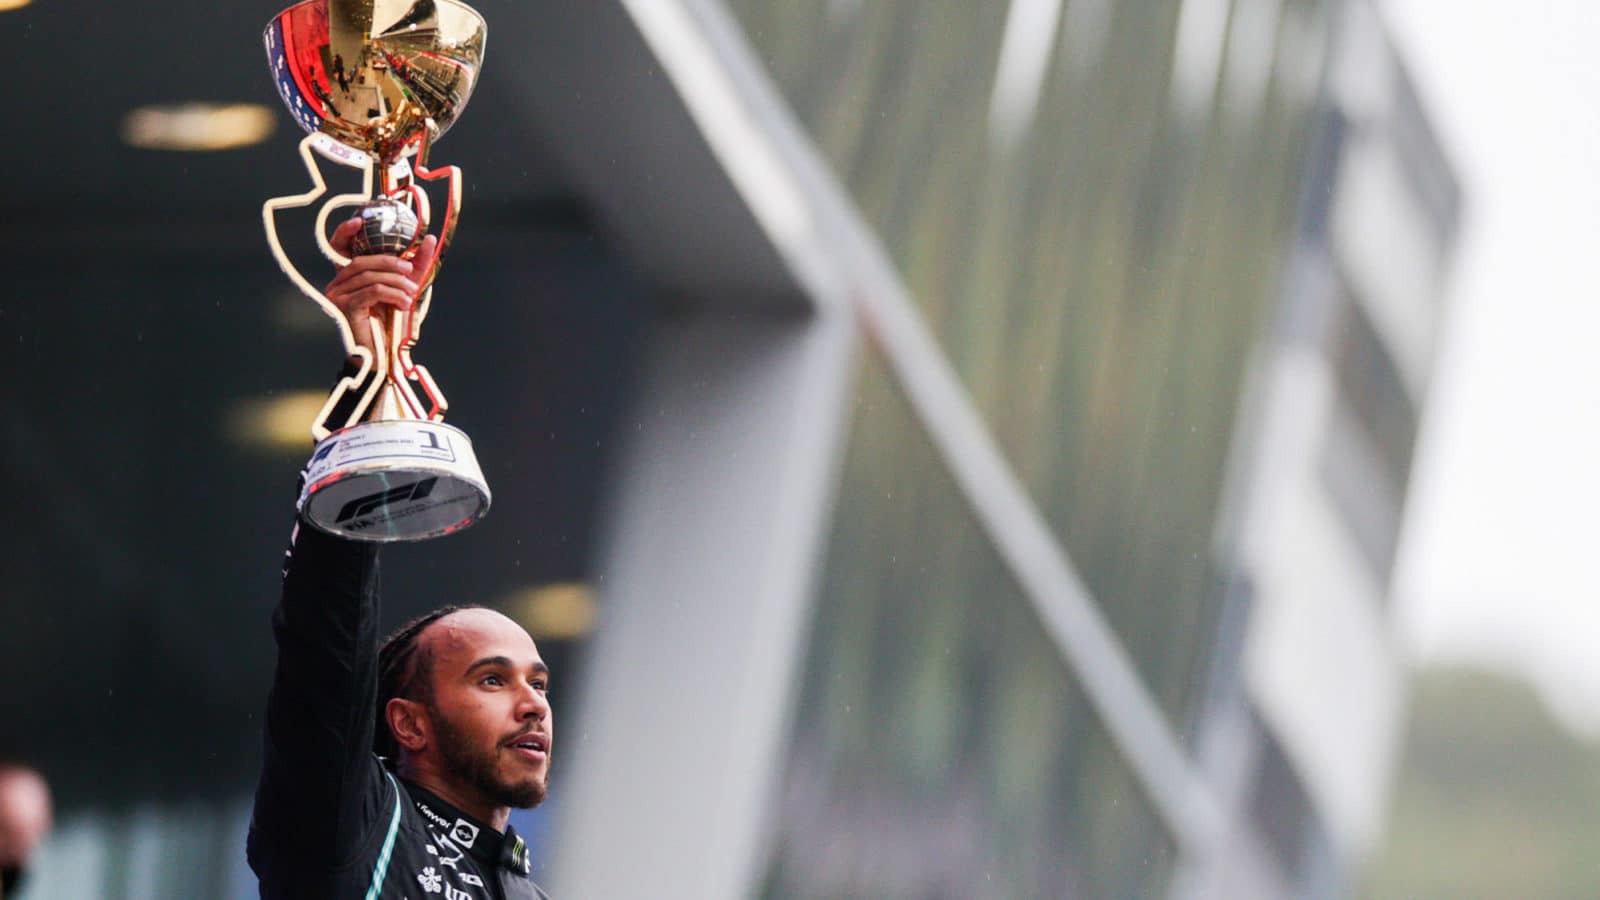 Lewis Hamilton holds the winning trophy after his 100th win in the 2021 Russian Grand Prix